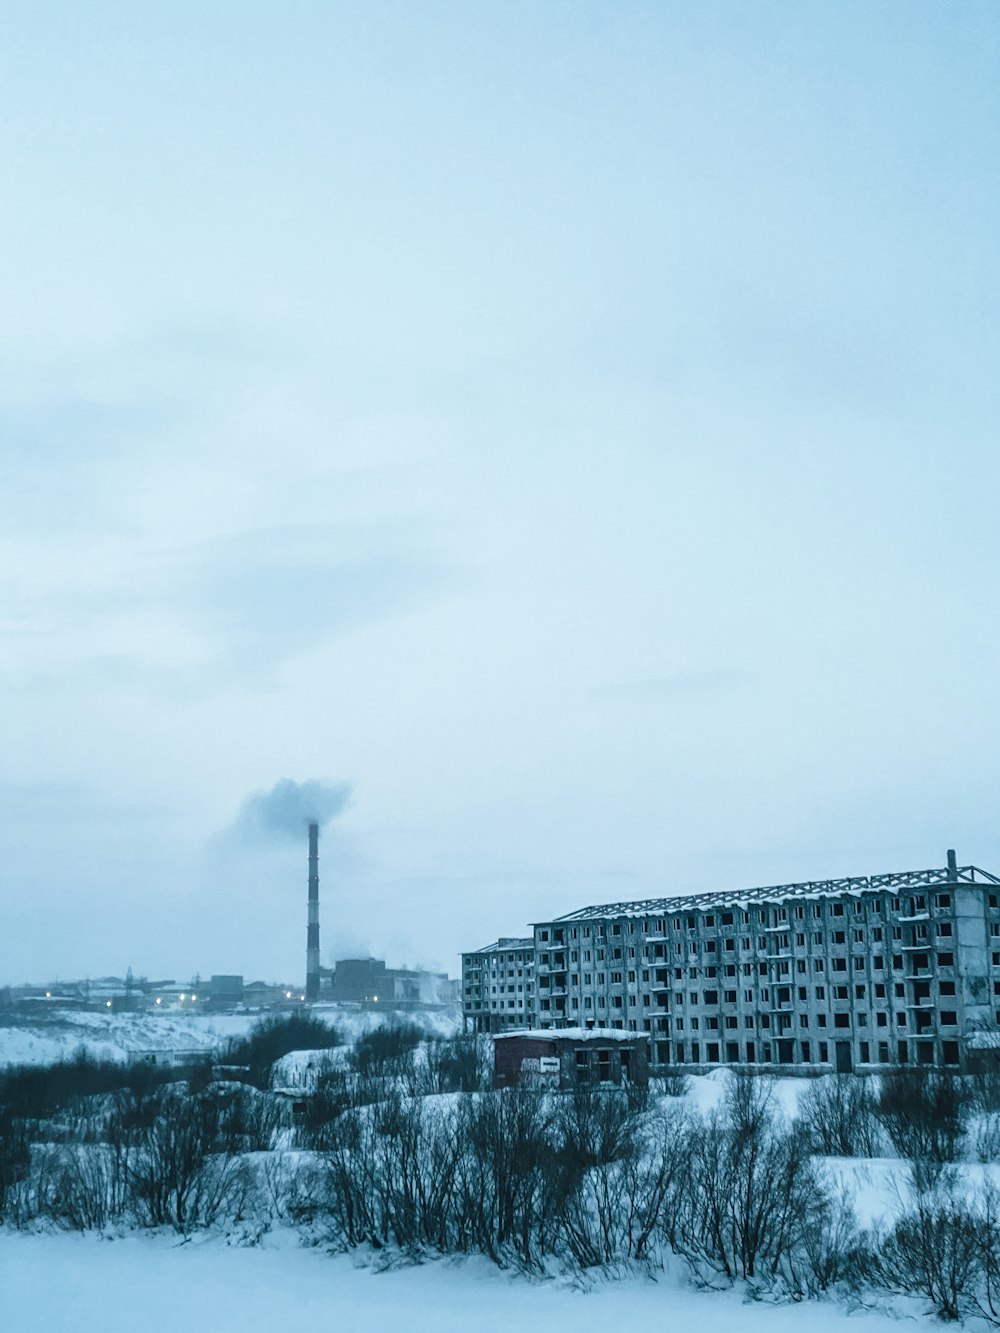 a factory in the distance with snow on the ground